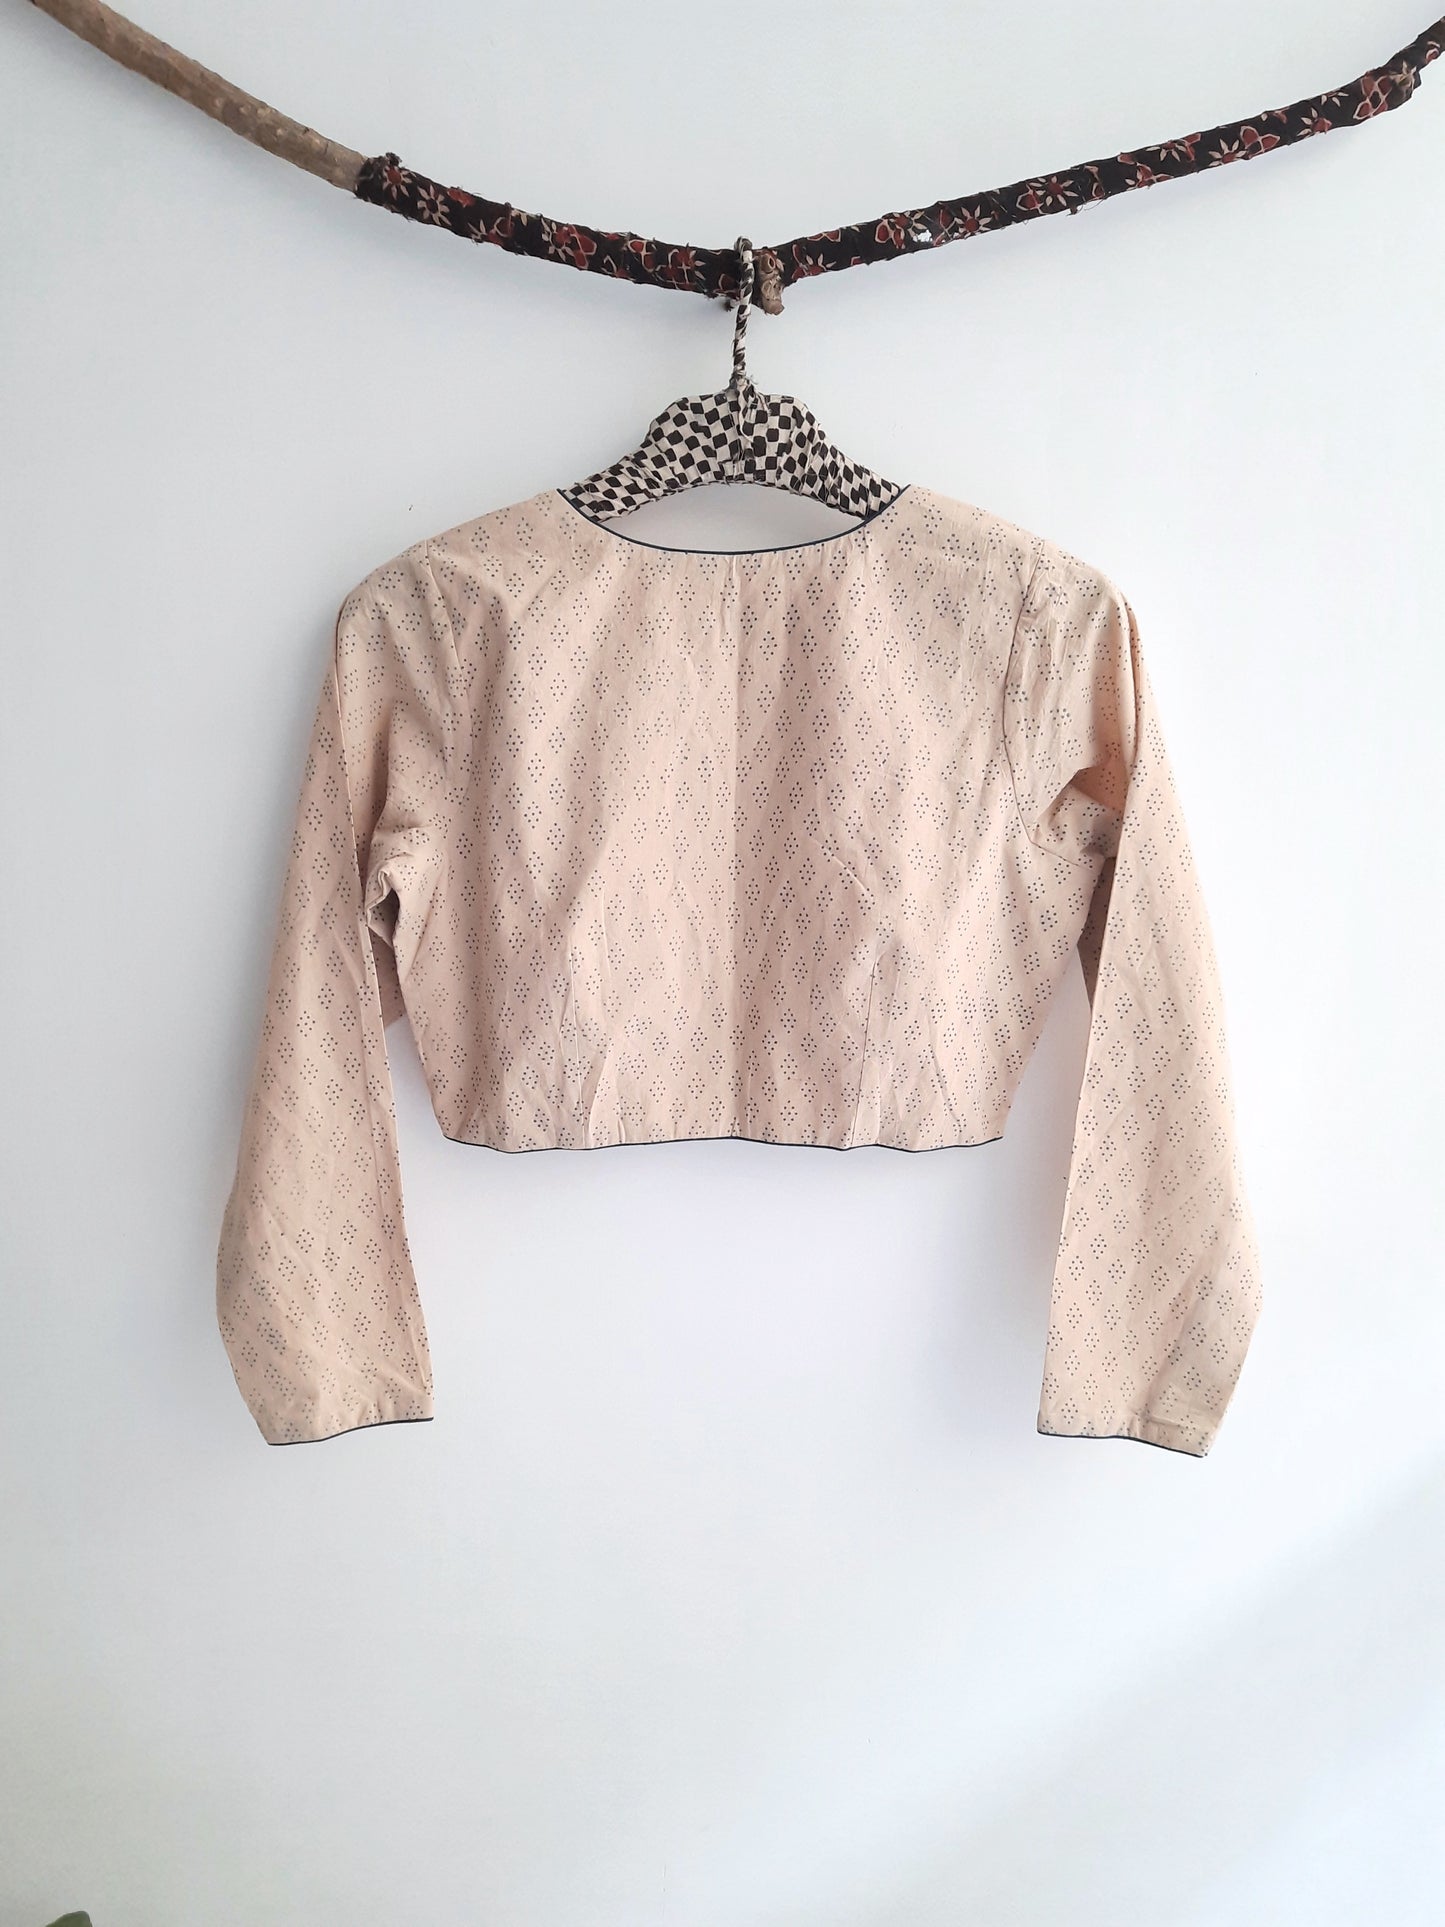 Beige Polka Dots Ajrakh Blouse with Full Sleeves.